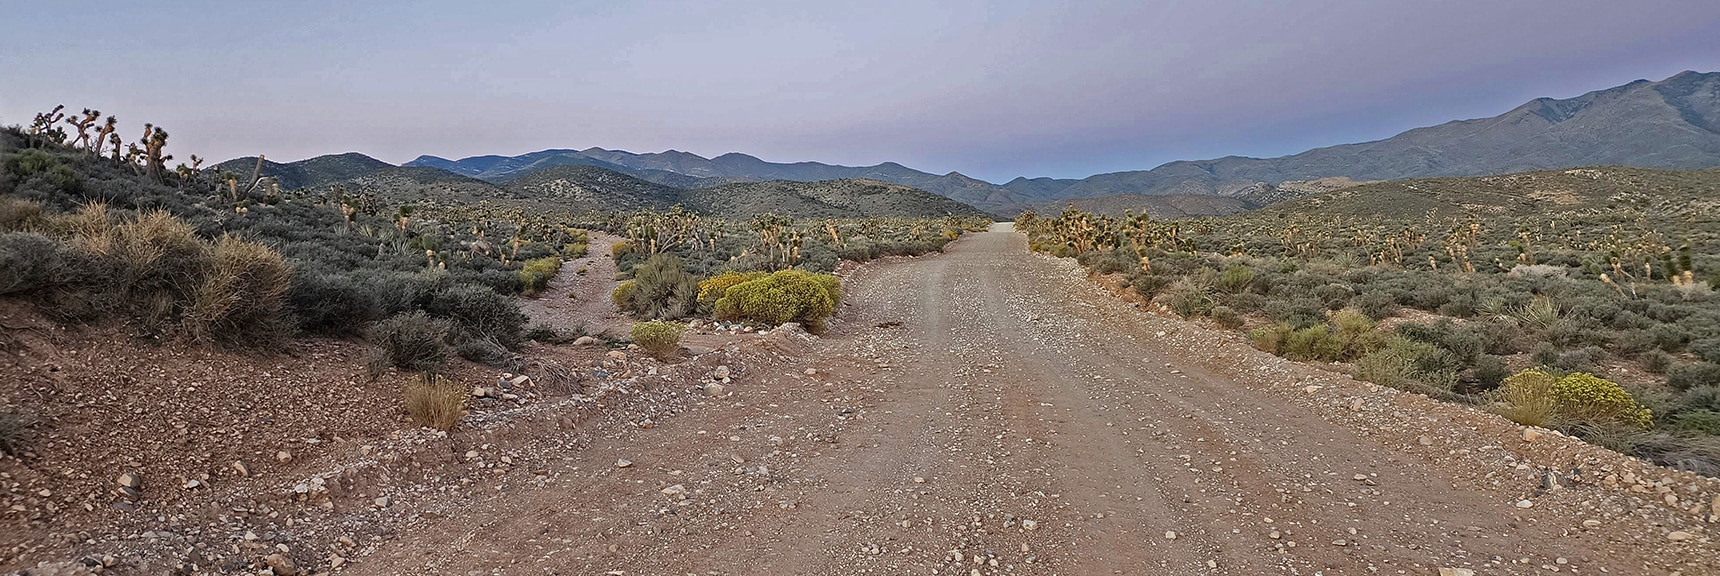 Unmarked 4WD Left Turnoff from Harris Springs Rd Toward La Madre Mountains Campground | Kyle Canyon Grand Crossing | Northern Half | La Madre Mountains Wilderness, Nevada